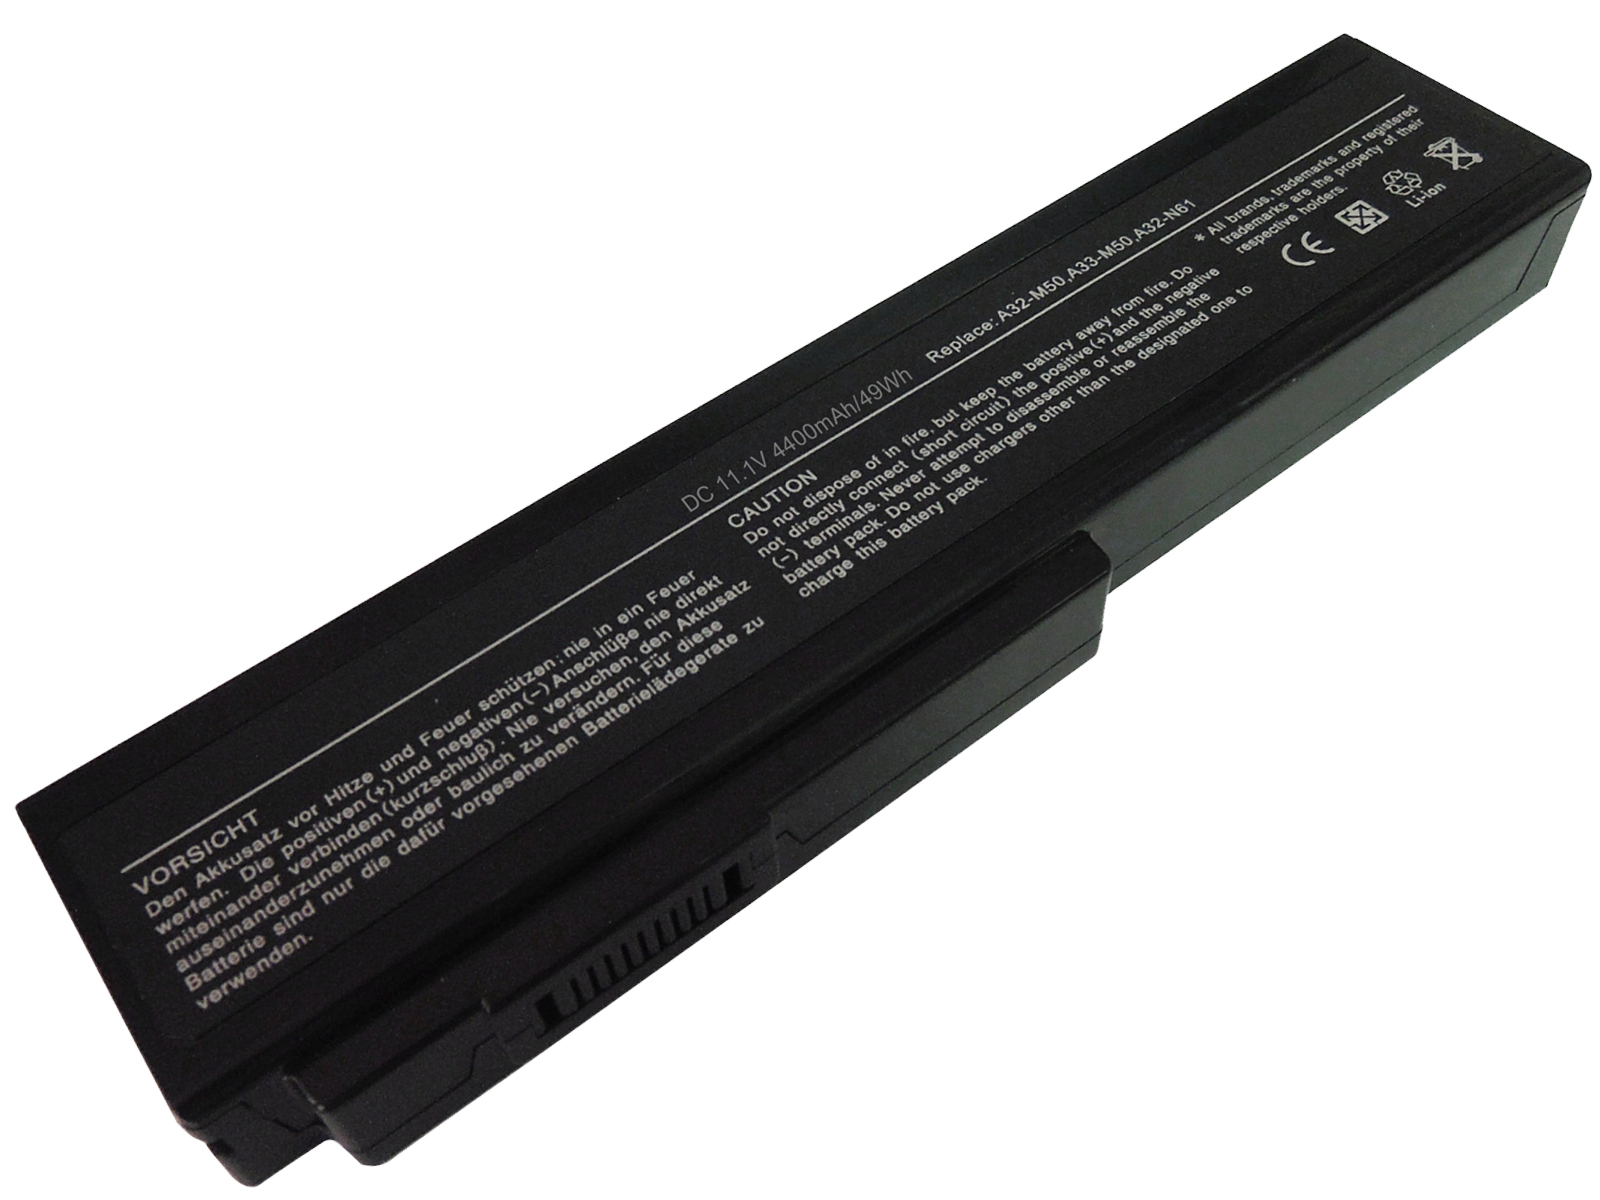 Superb Choice 6-cell ASUS M50Q Laptop Battery - image 1 of 1